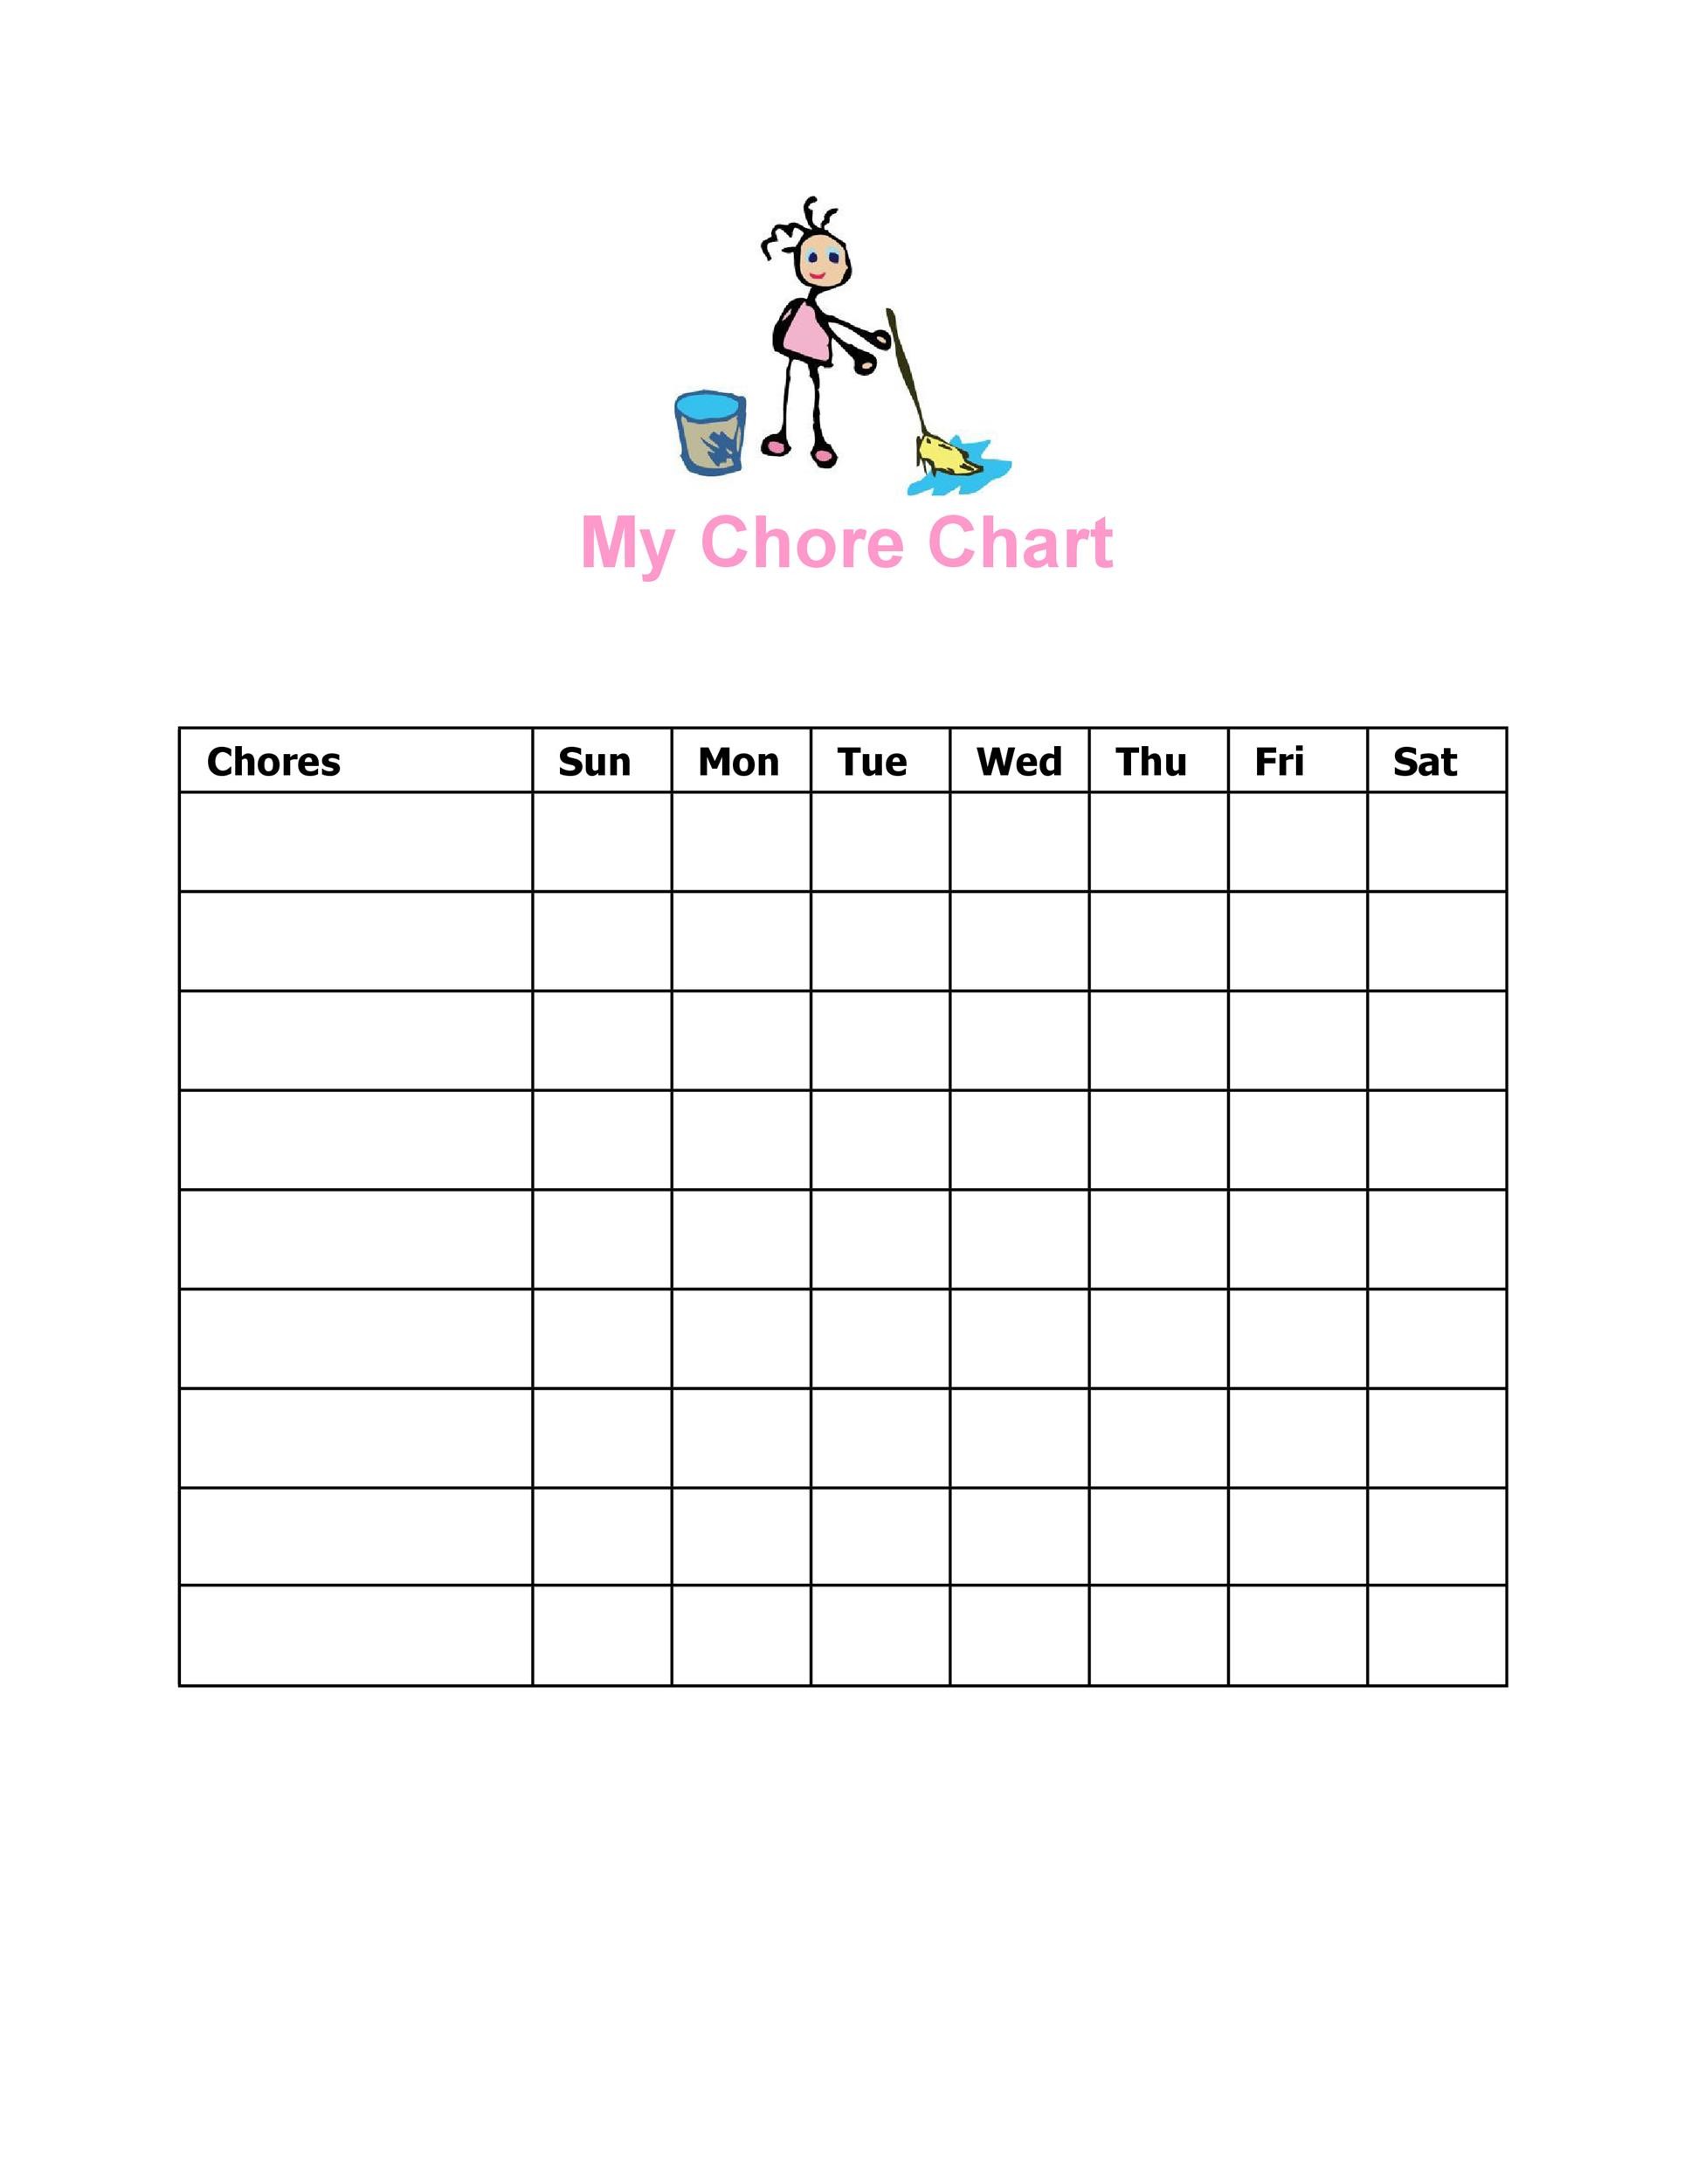 Free Chore List Template from templatelab.com